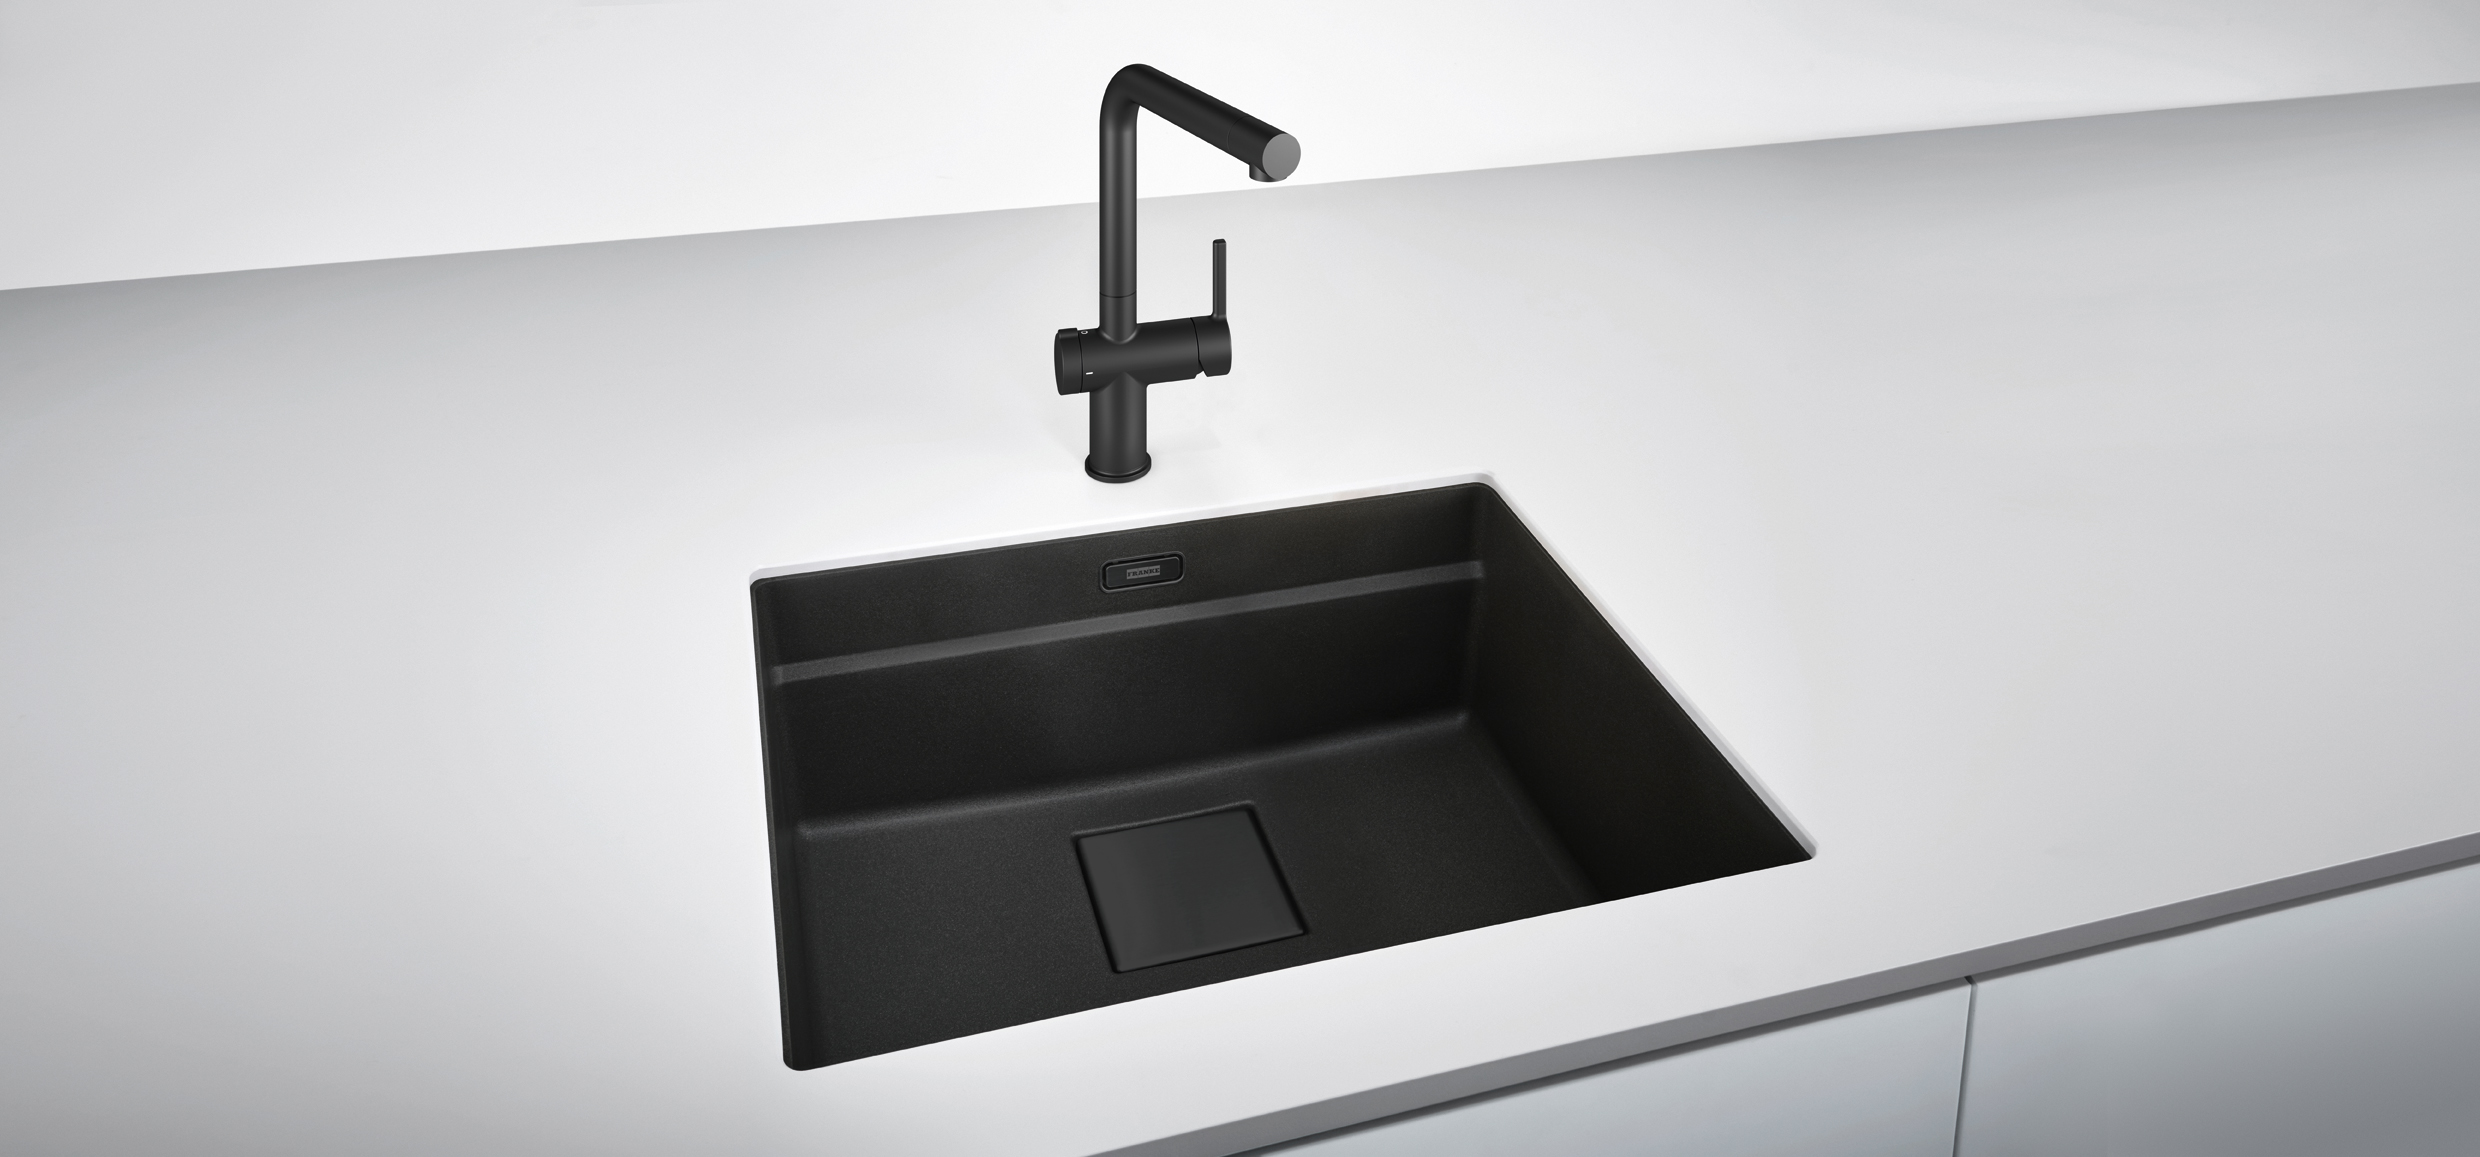 Active Twist tap in Matte Black and Kubus 2 sink